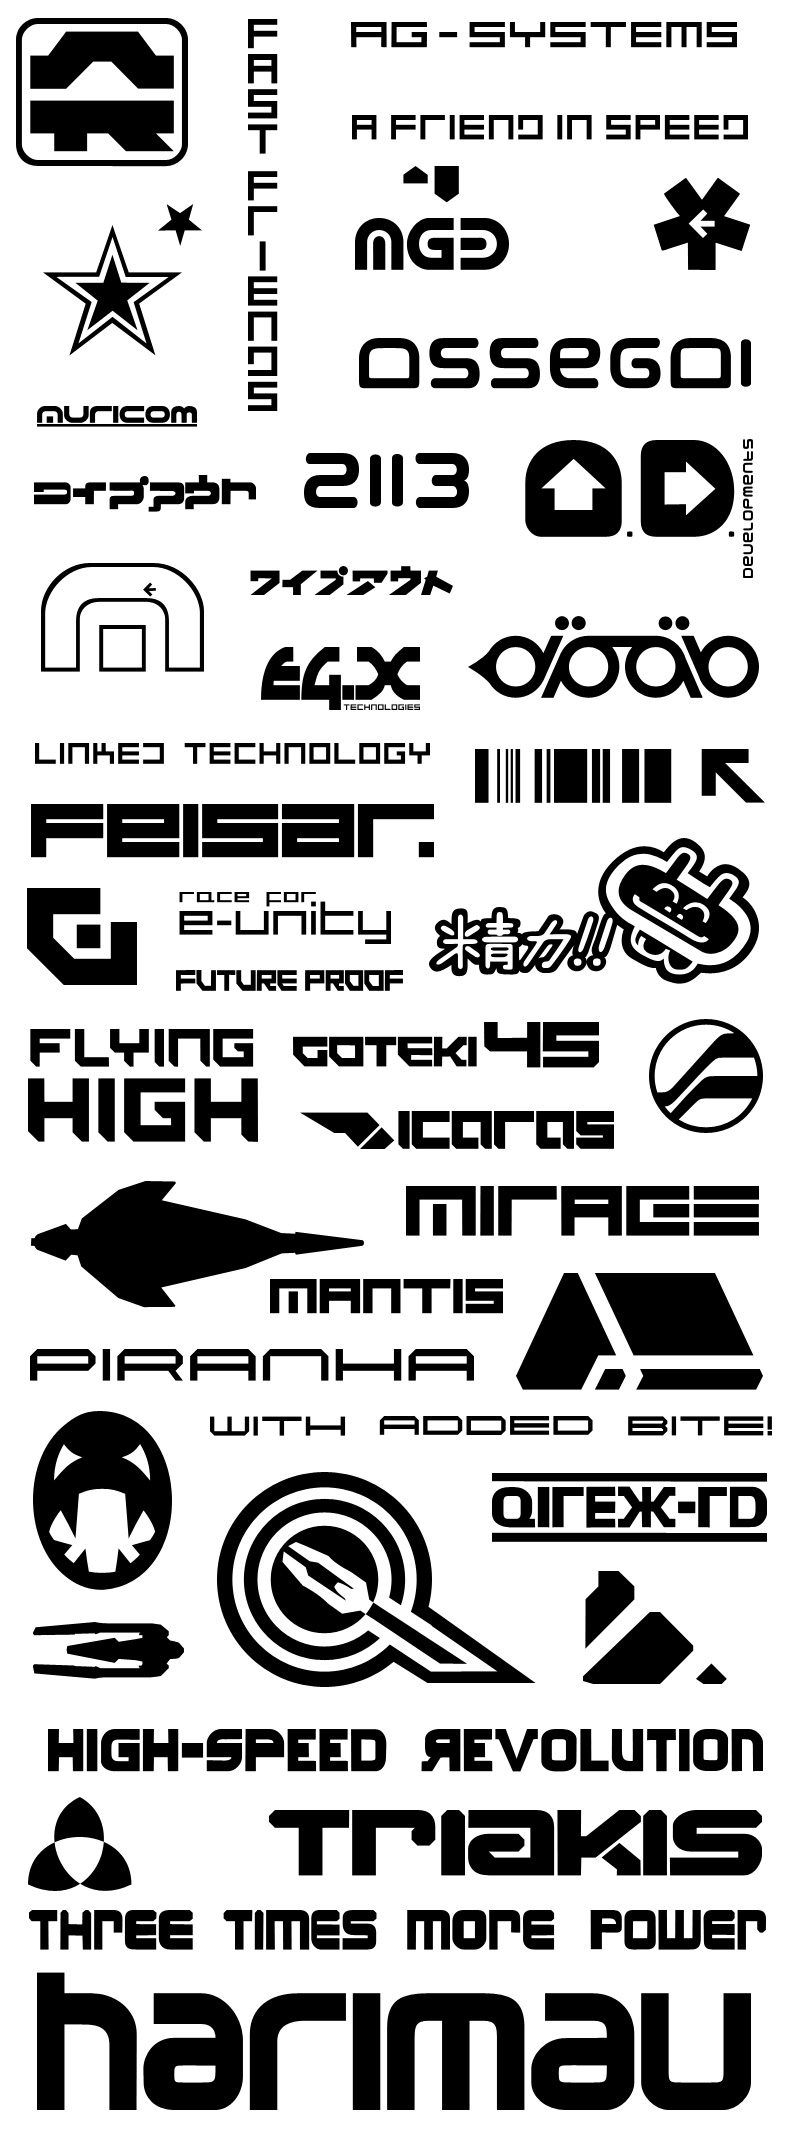 WipEout logos and texts